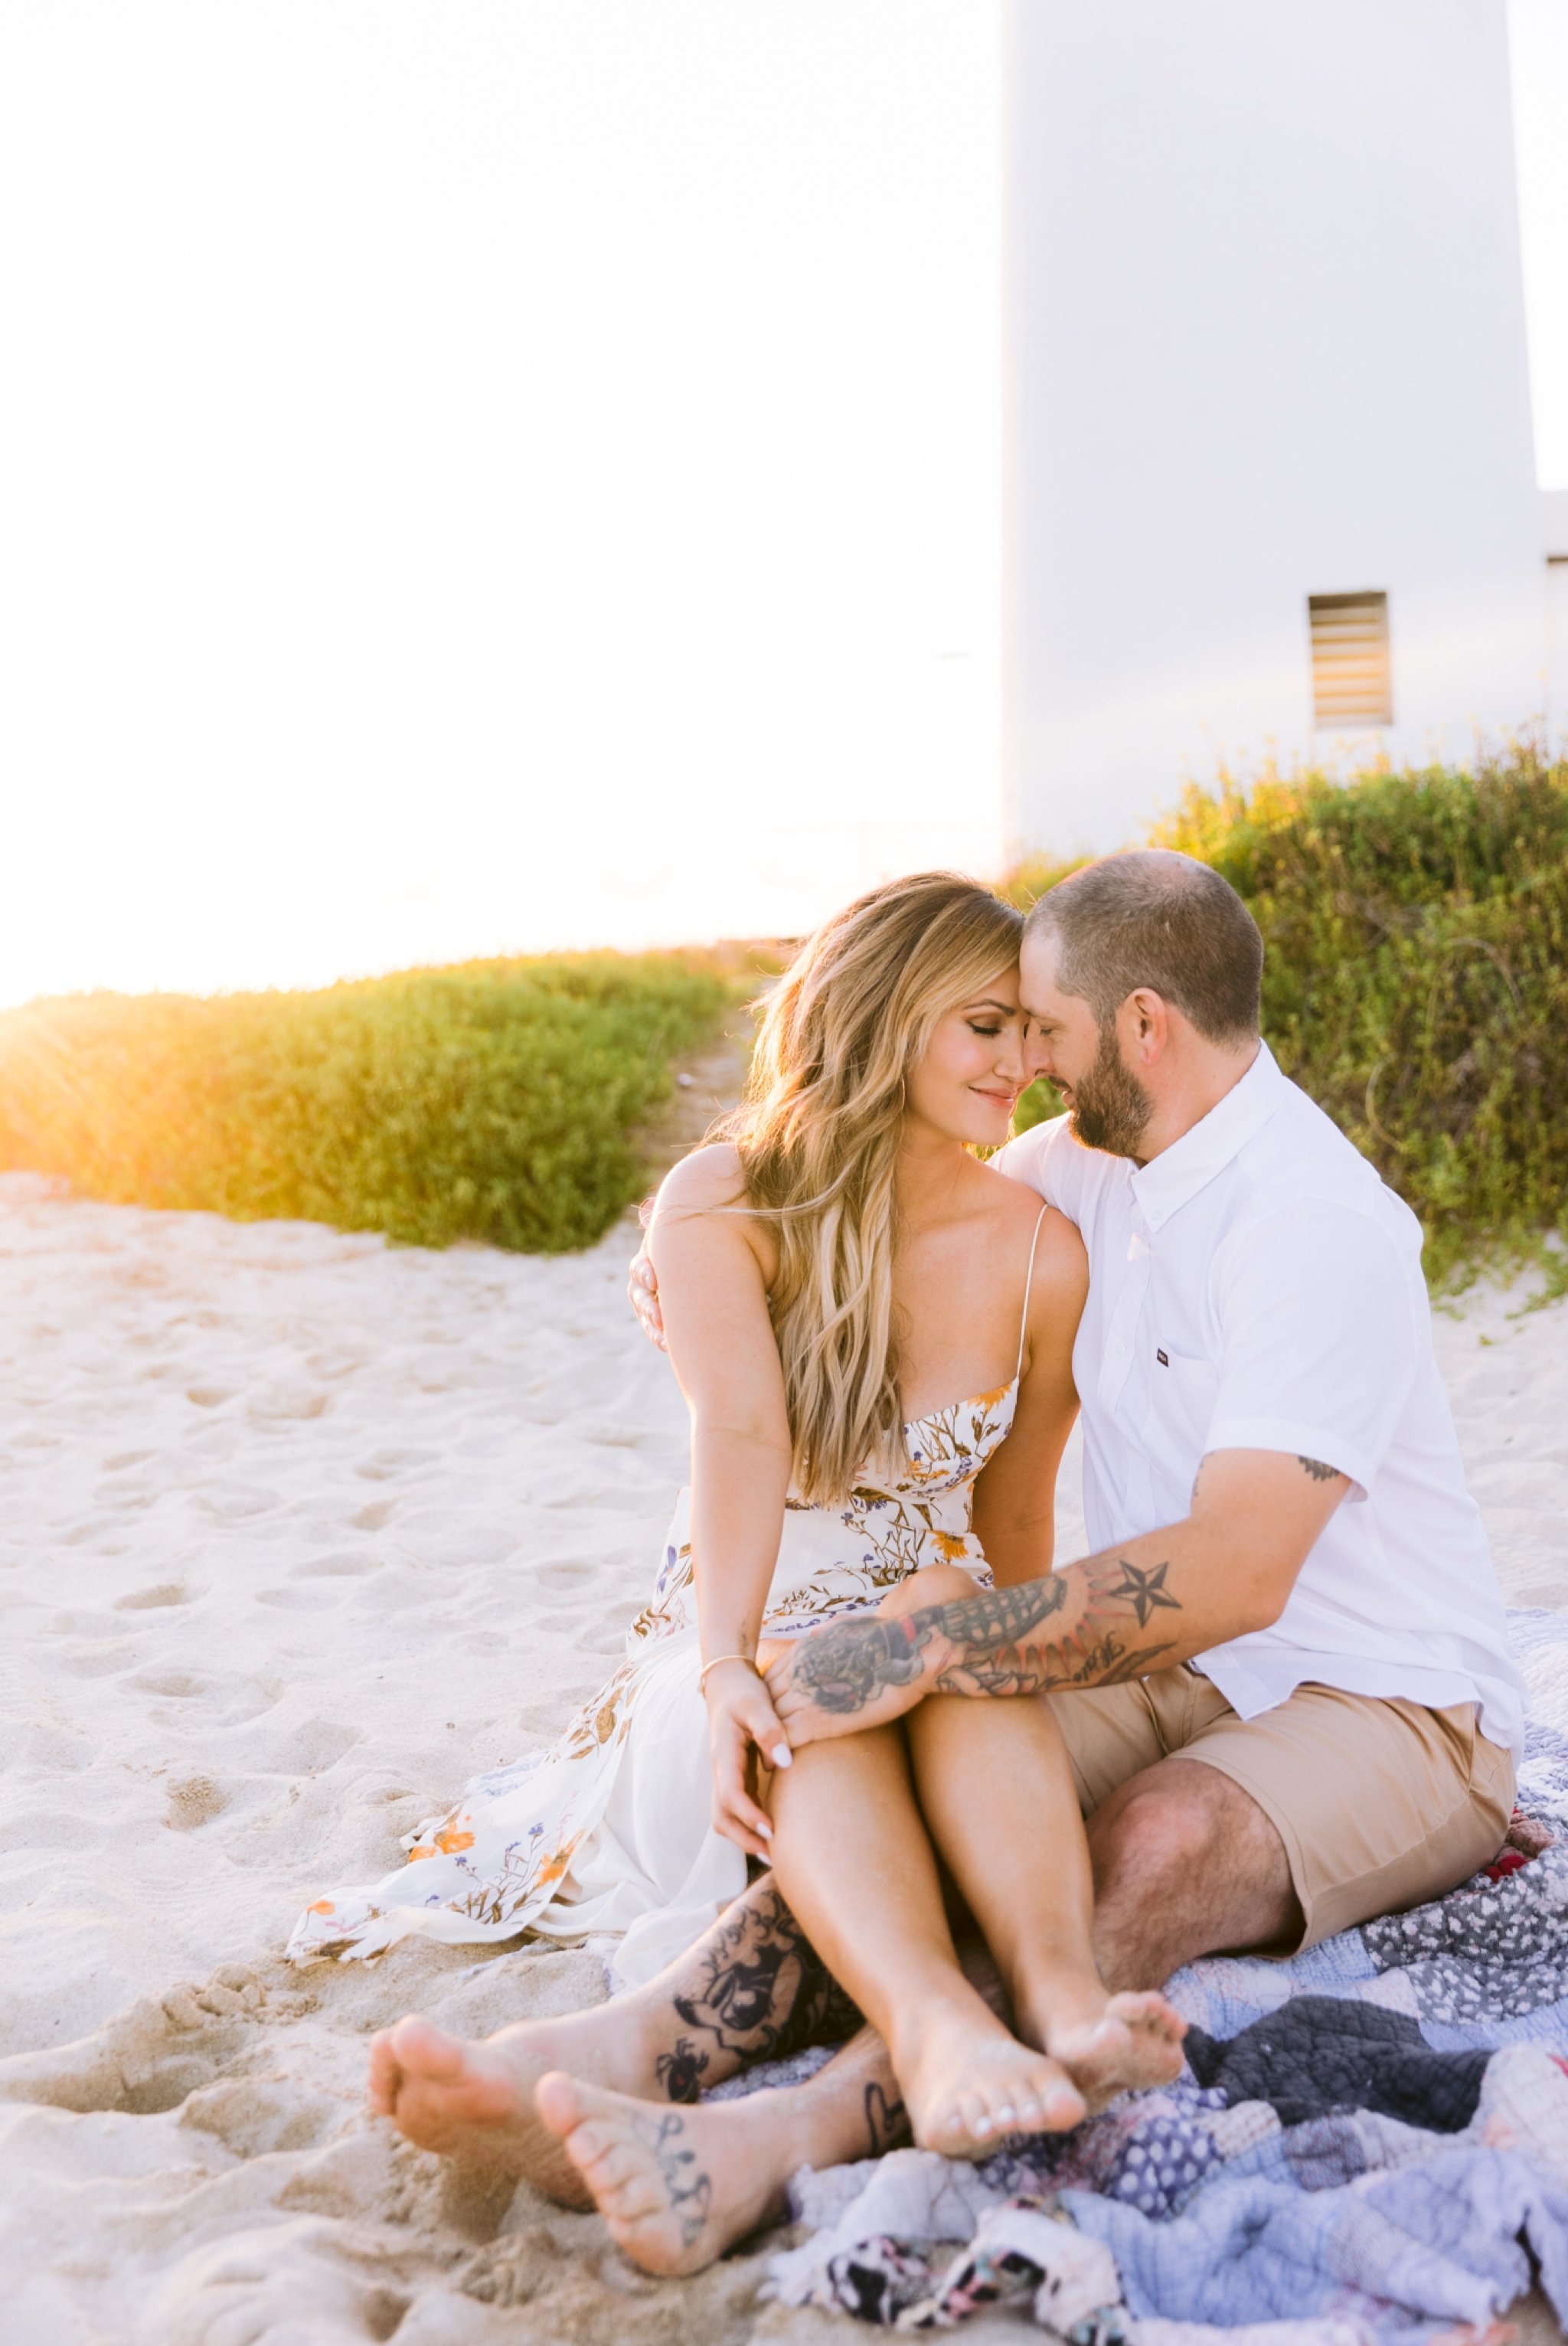 Sunset Engagement Photography at Barbers Point Beach Park - Oahu Couples Photographer